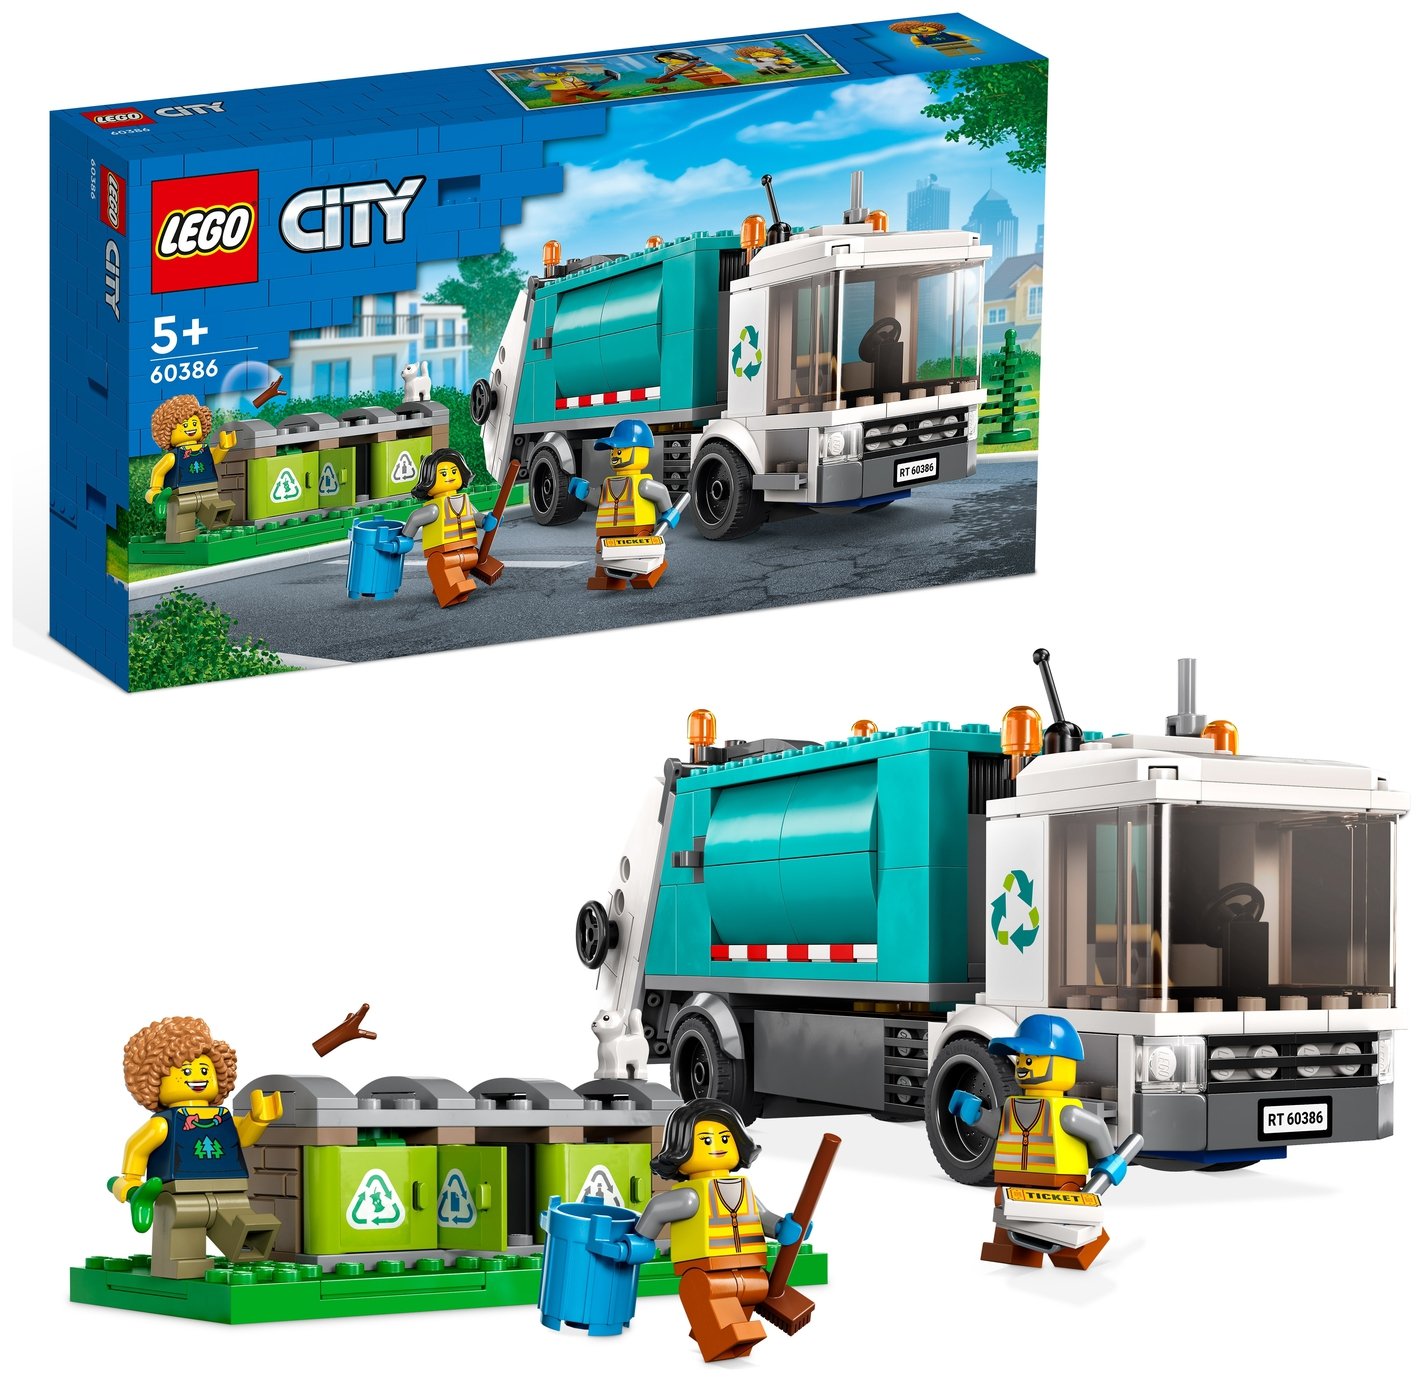 LEGO City Recycling Truck Bin Lorry Toy, Vehicle Set 60386 review